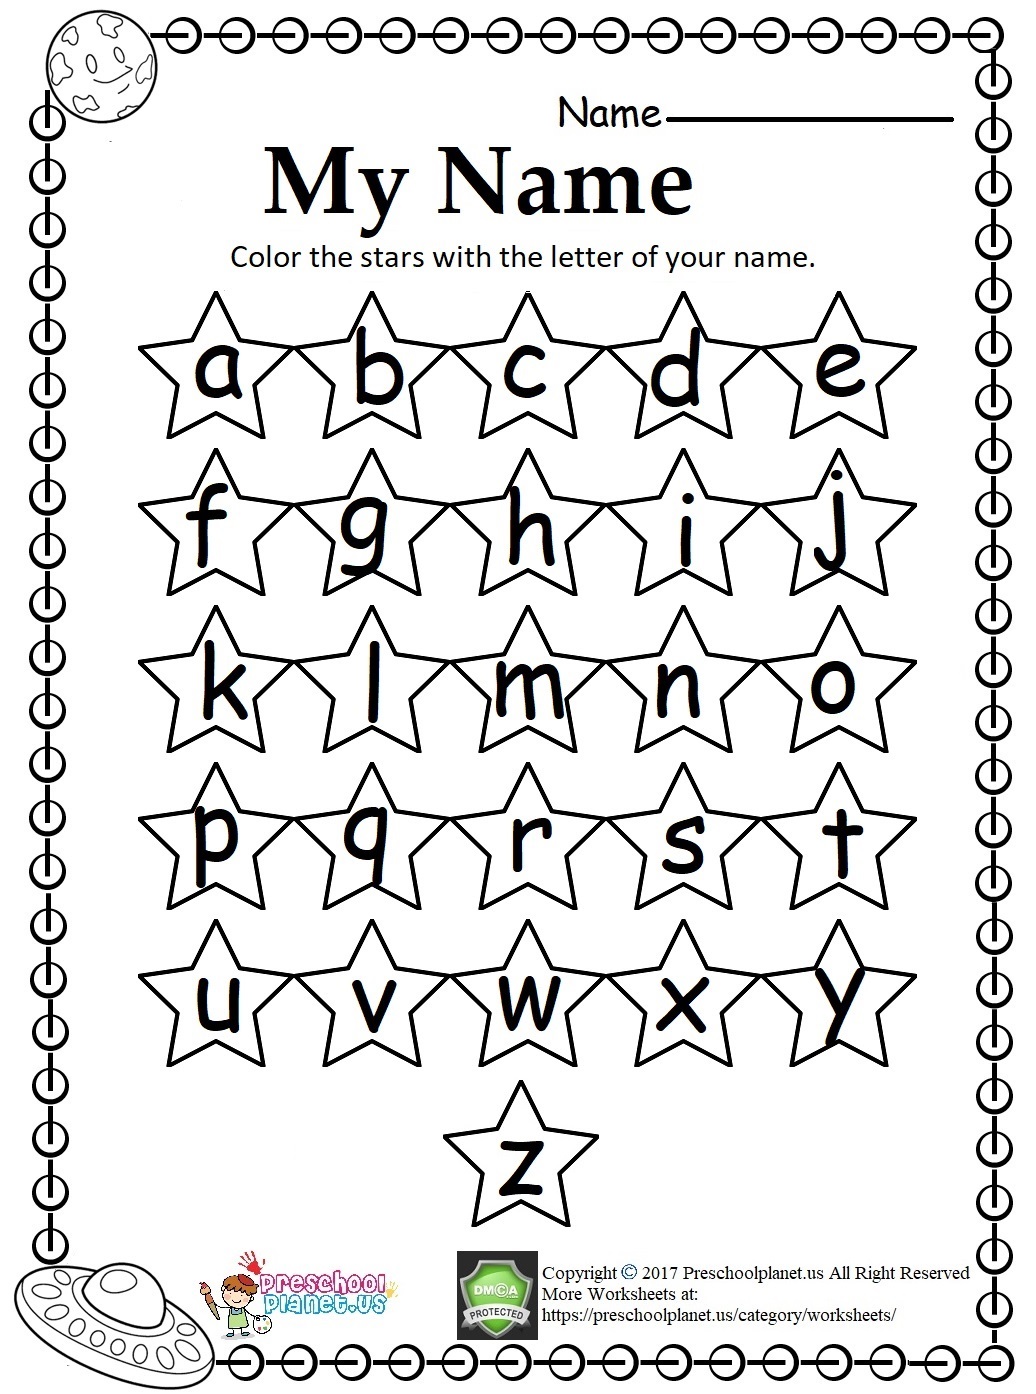 Worksheets For Writing Names / Remarkable Blank Writing Worksheets